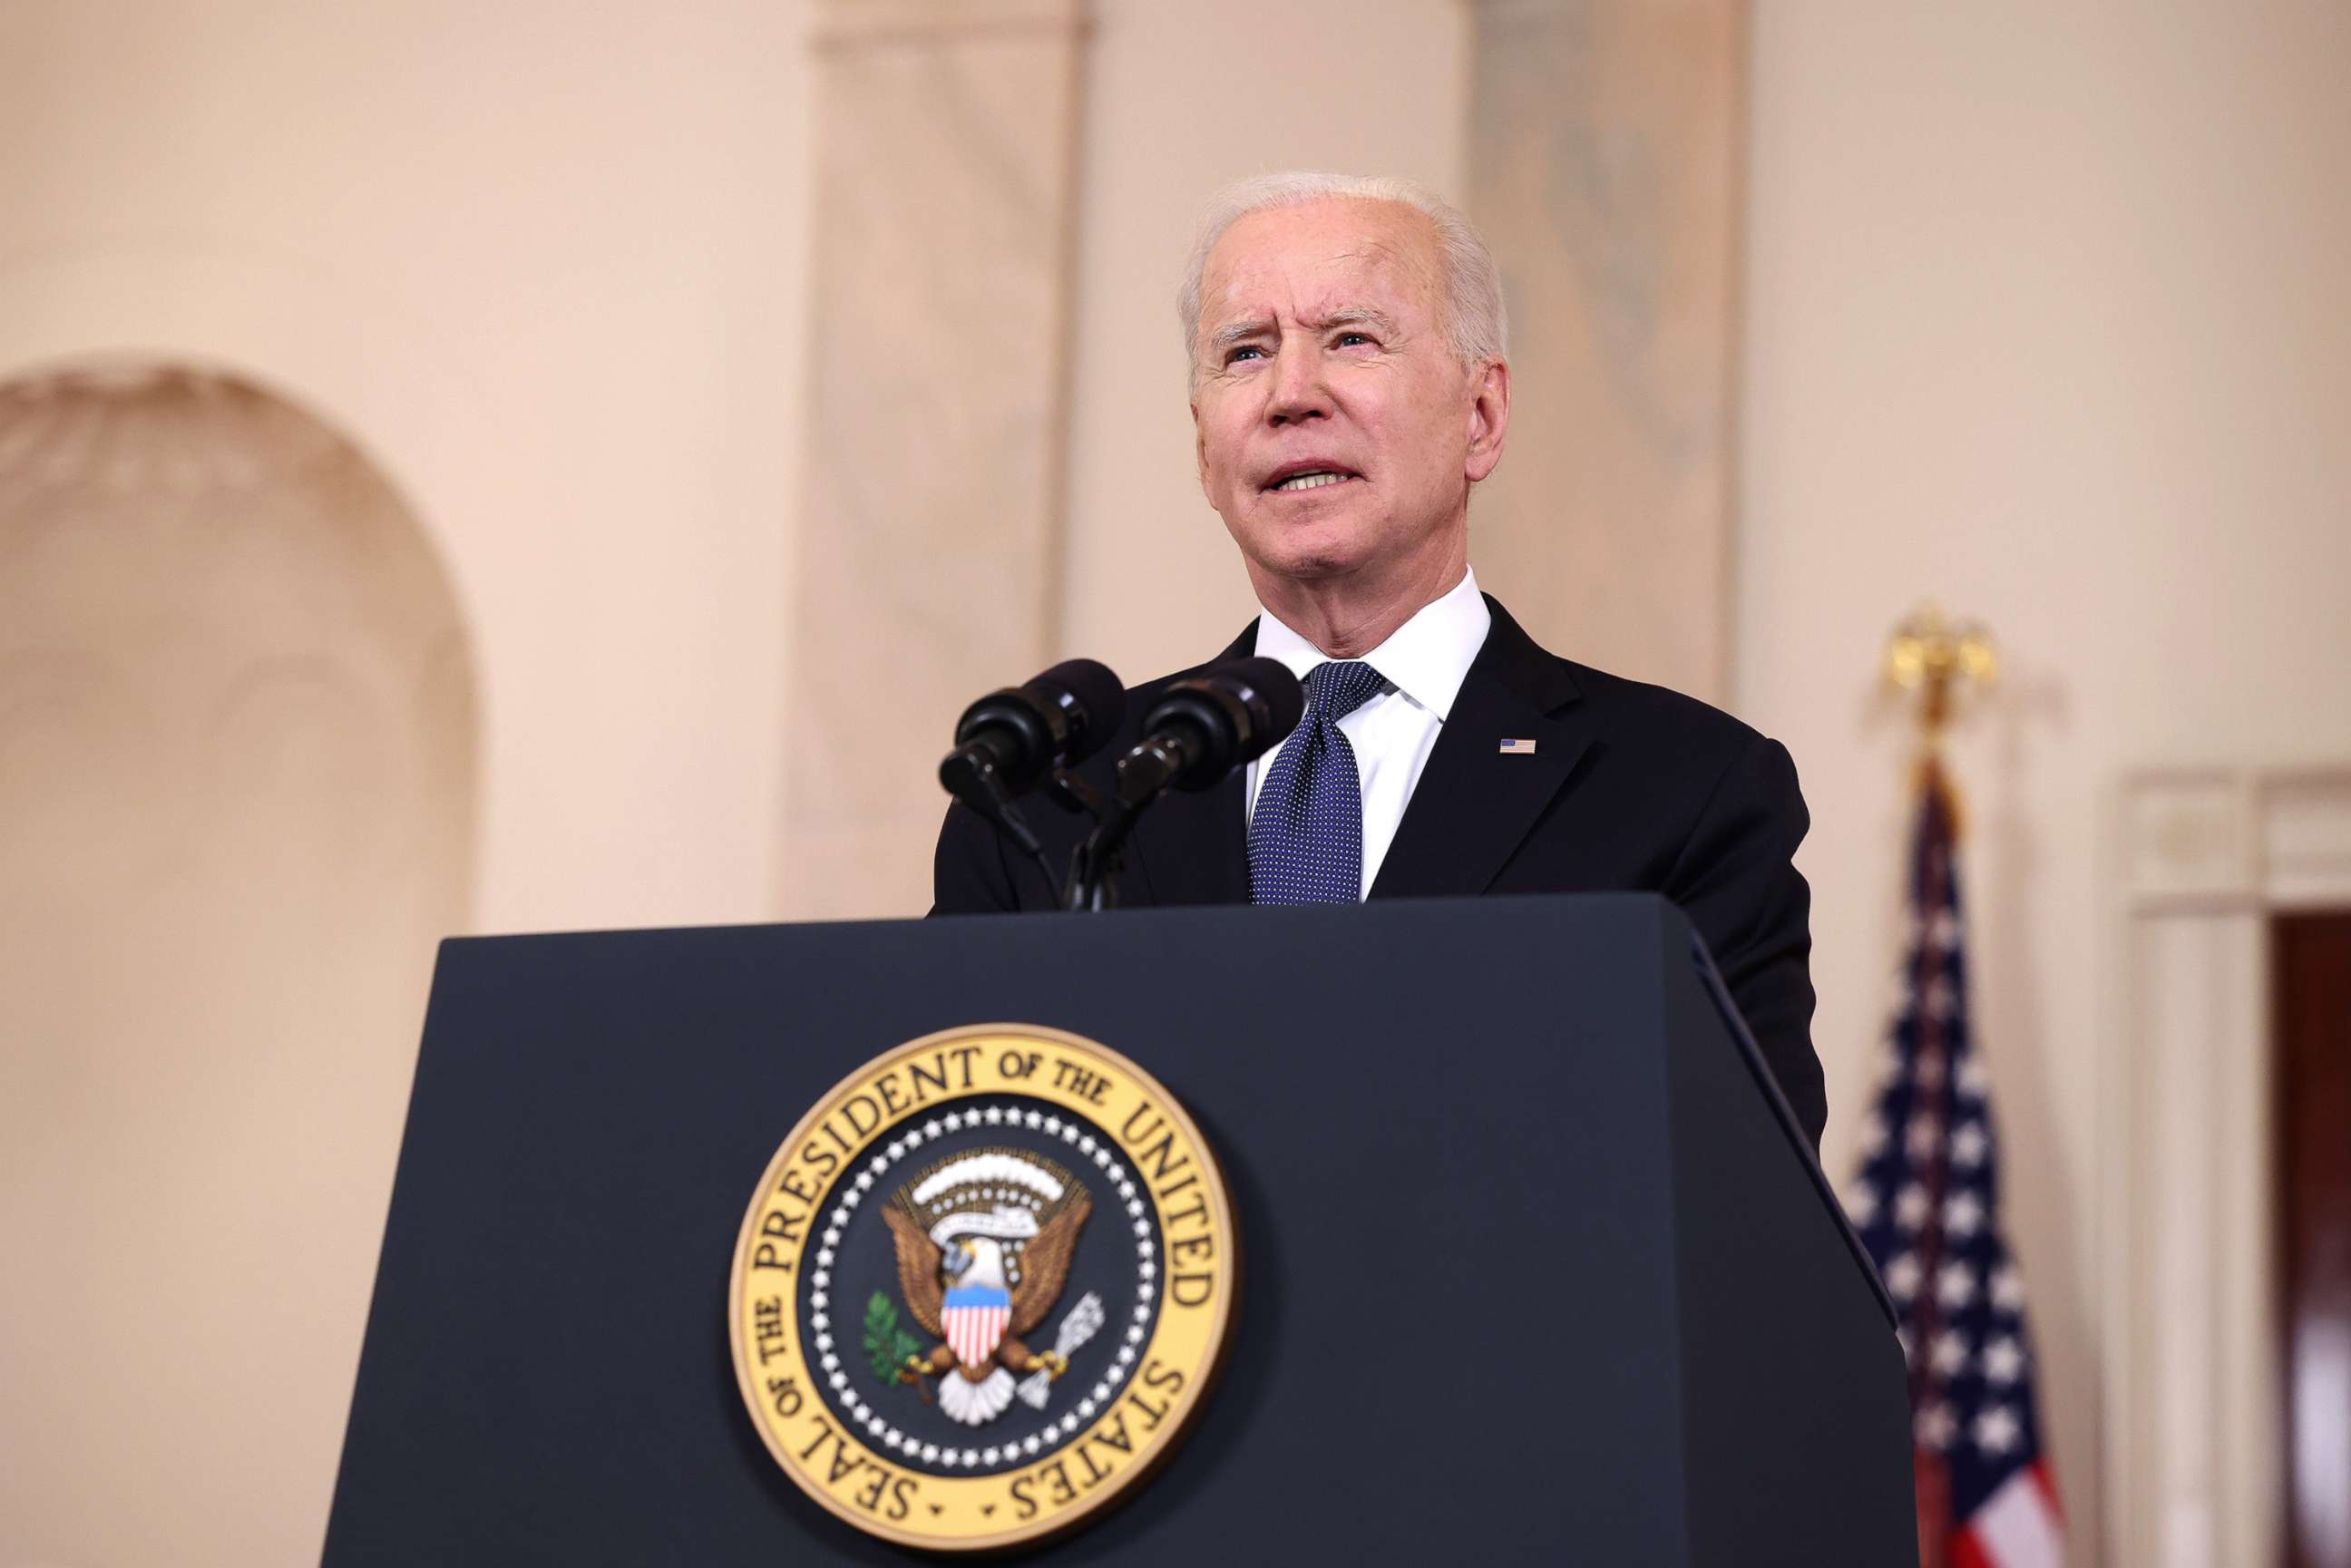 PHOTO: President Joe Biden delivers remarks from the White House, May 20, 2021.